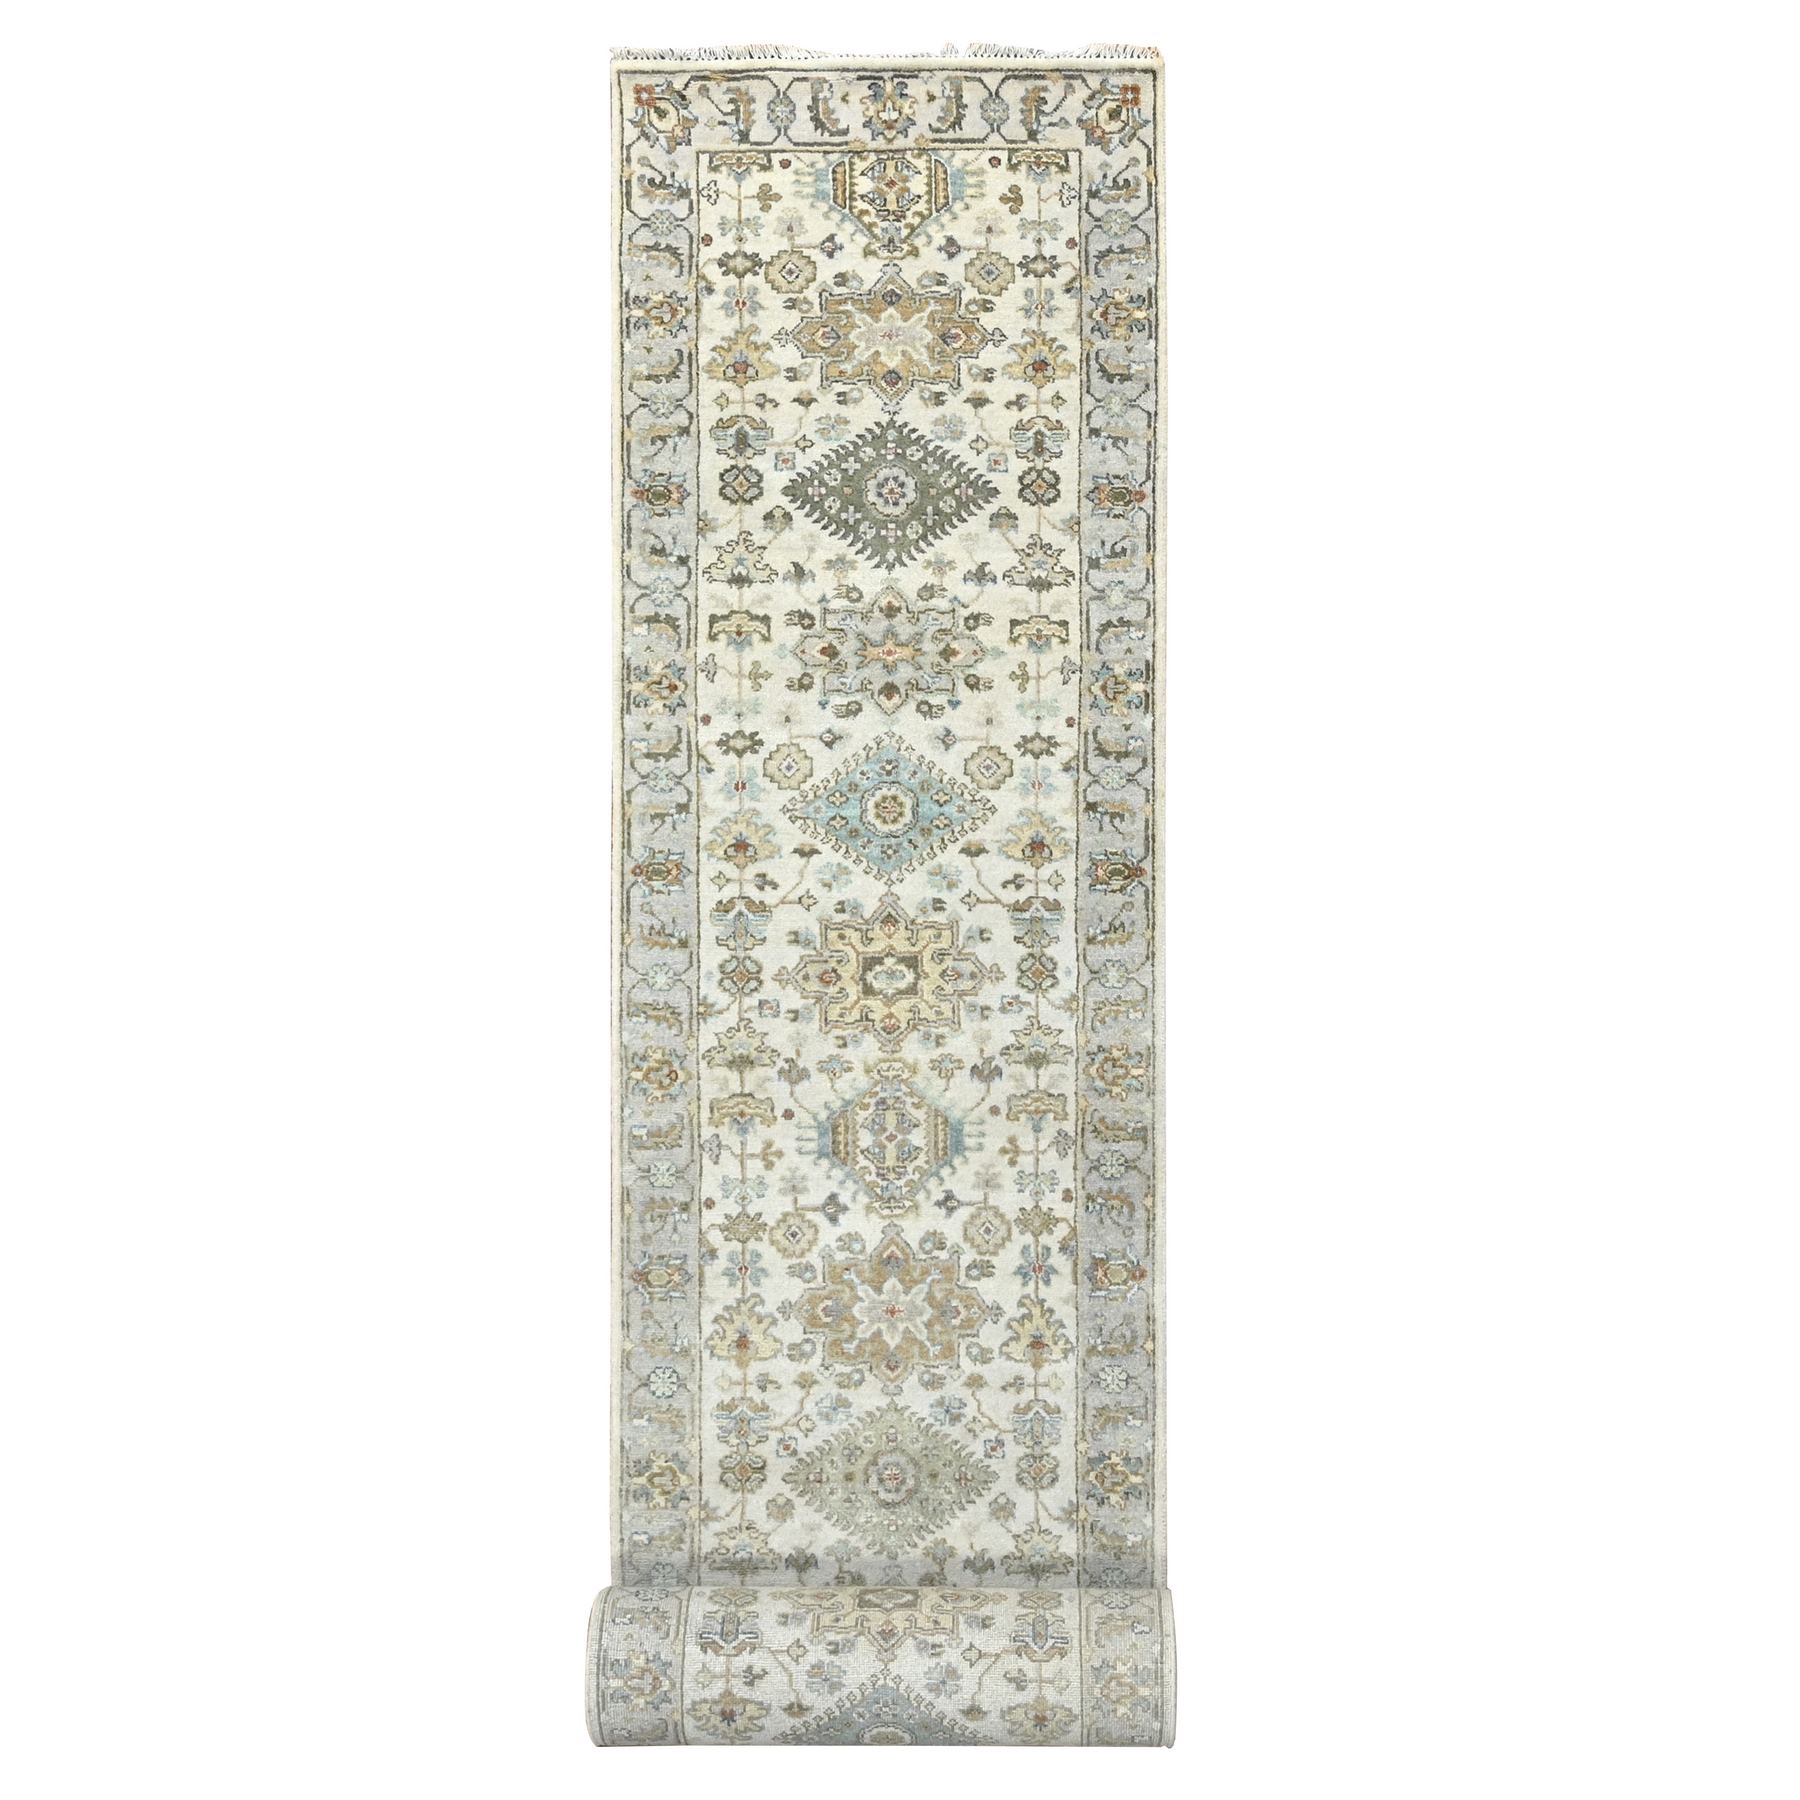 Frosted Dawn White, Soft and Shiny Wool, Hand Knotted, Karajeh Design With Geometric Medallions, Denser Weave, Soft to The Touch Pile, XL Runner Oriental Rug